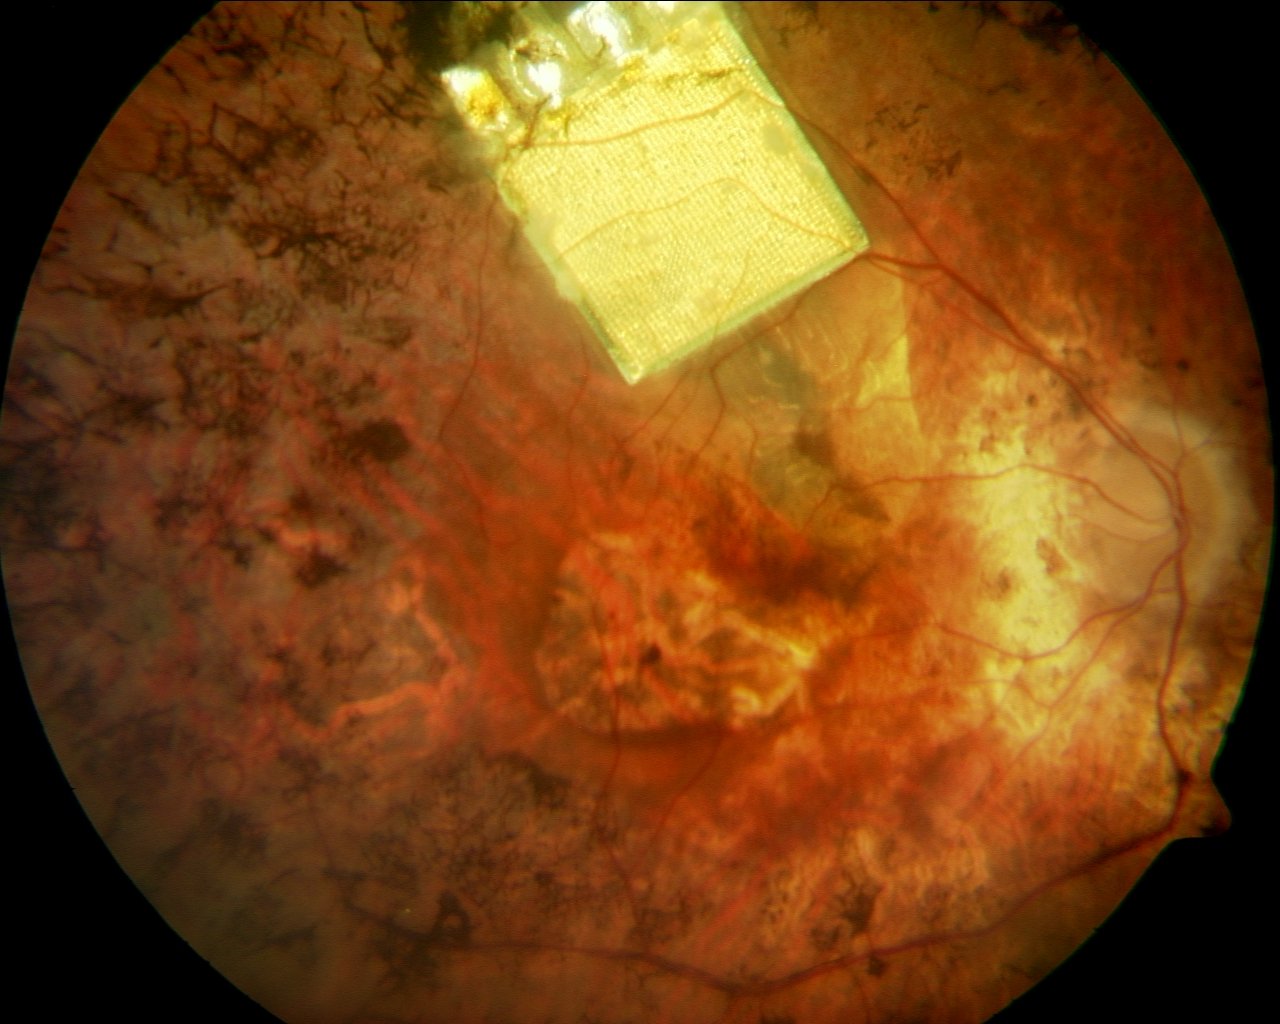 The retina implant uses electrodes on the chip to absorb light entering the eye and converts it into electrical energy to stimulate nerves within the retina